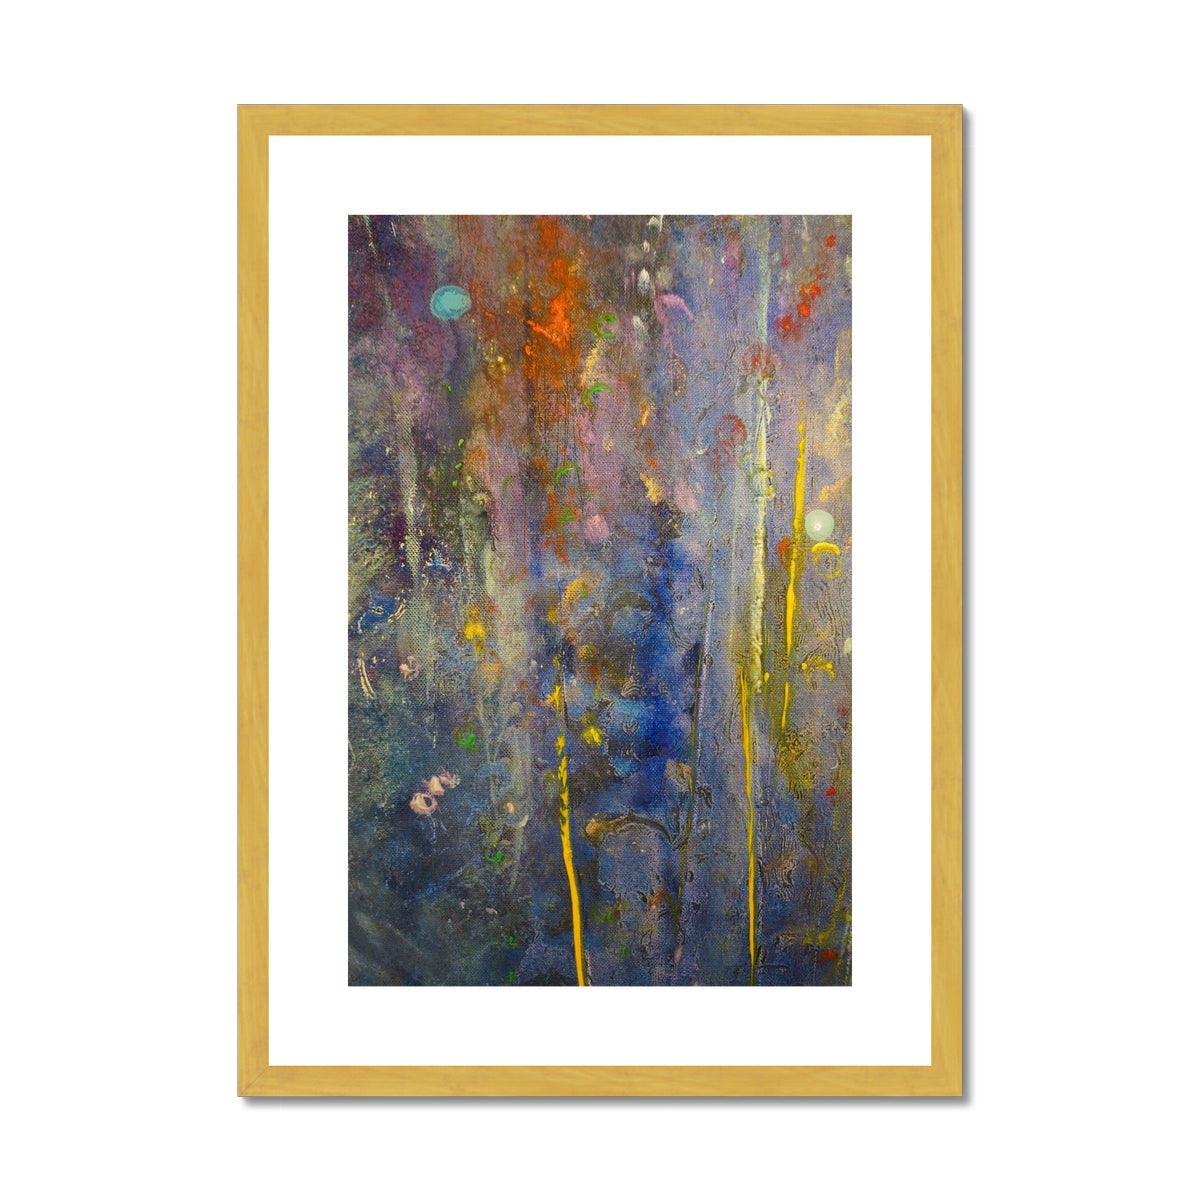 Cairngorms Waterfall Abstract Painting | Antique Framed & Mounted Prints From Scotland-Antique Framed & Mounted Prints-Abstract & Impressionistic Art Gallery-A2 Portrait-Gold Frame-Paintings, Prints, Homeware, Art Gifts From Scotland By Scottish Artist Kevin Hunter